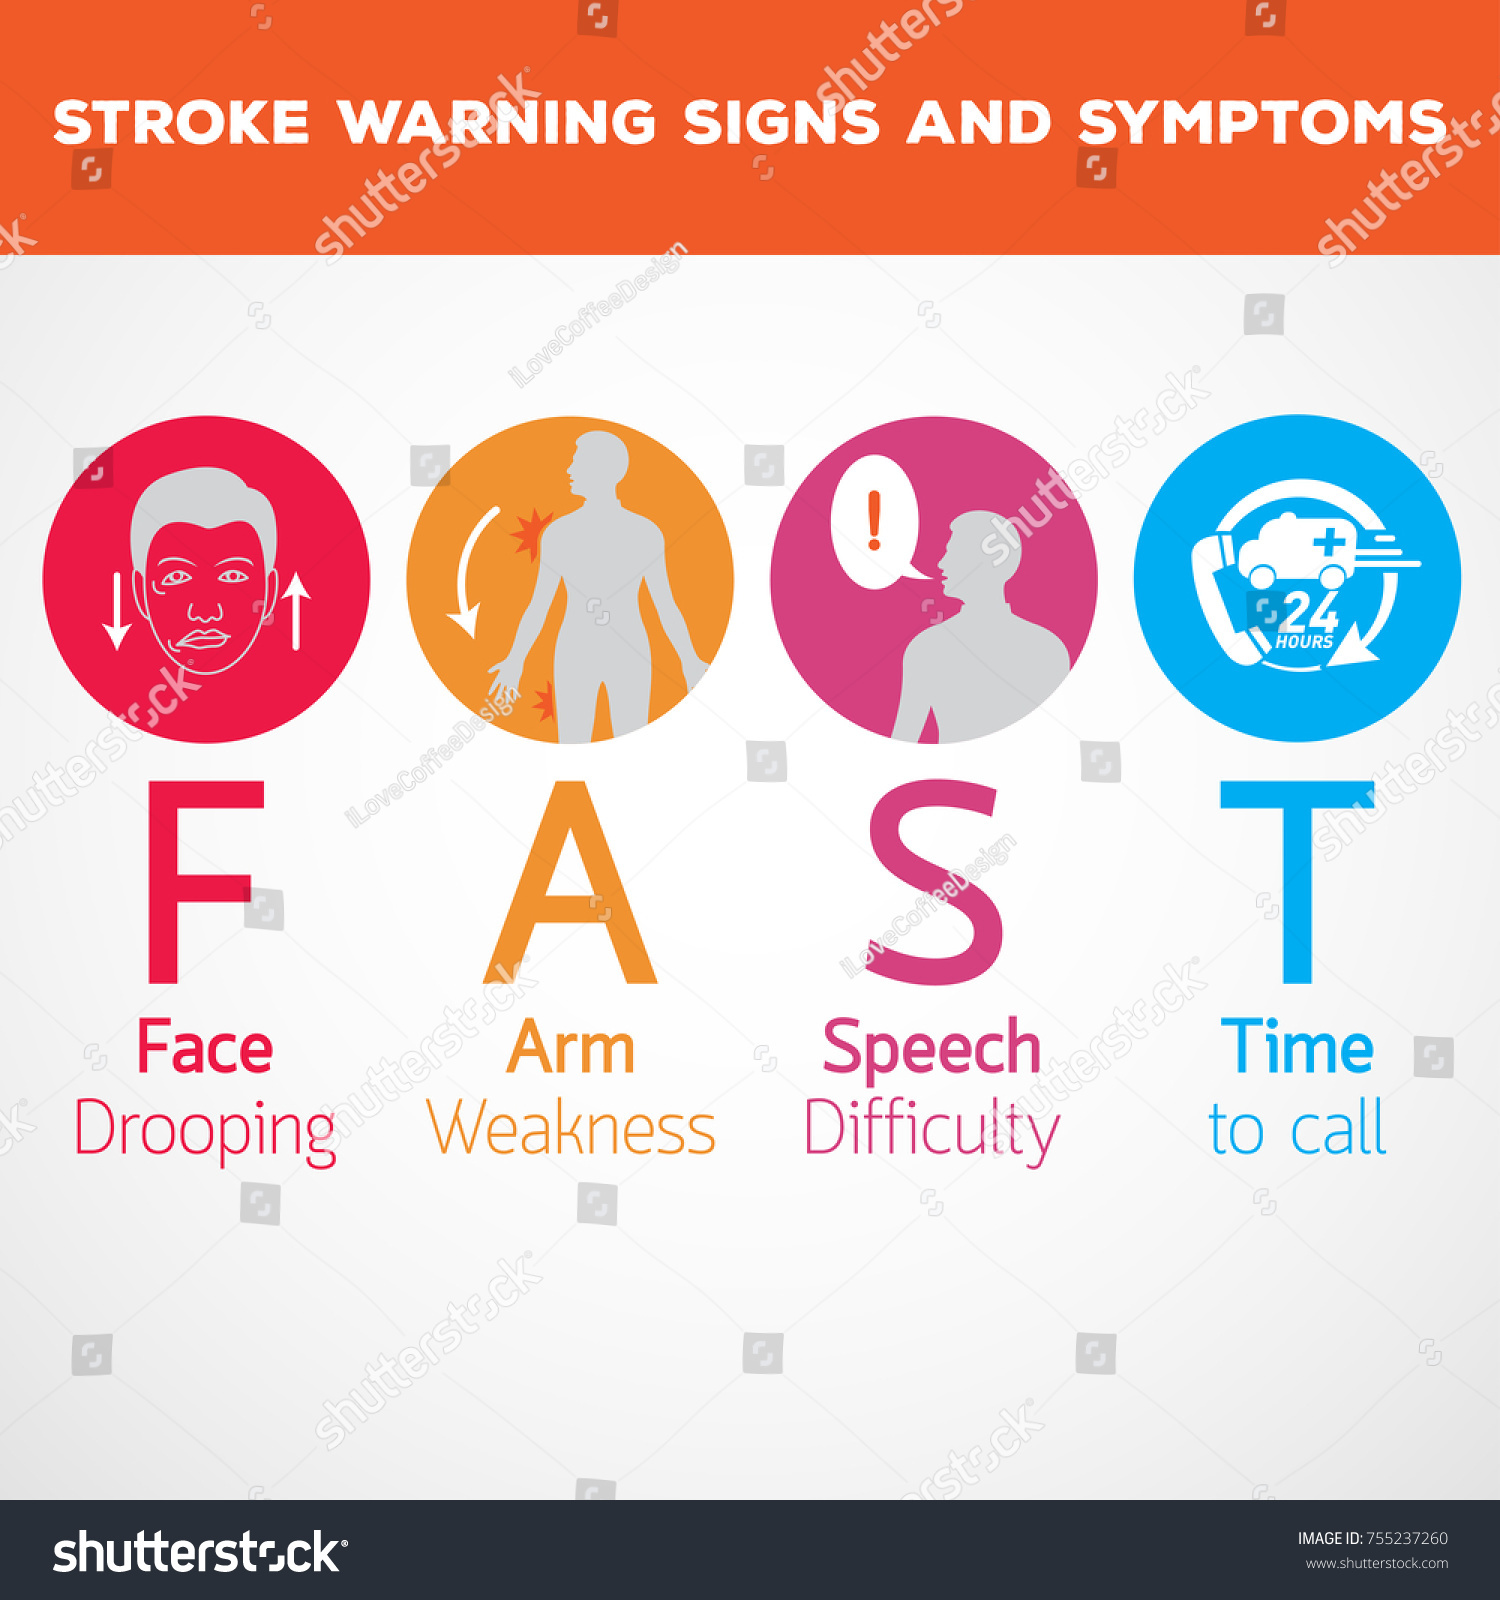 Stroke Warning Signs And Symptoms Royalty Free Stock Vector 755237260 